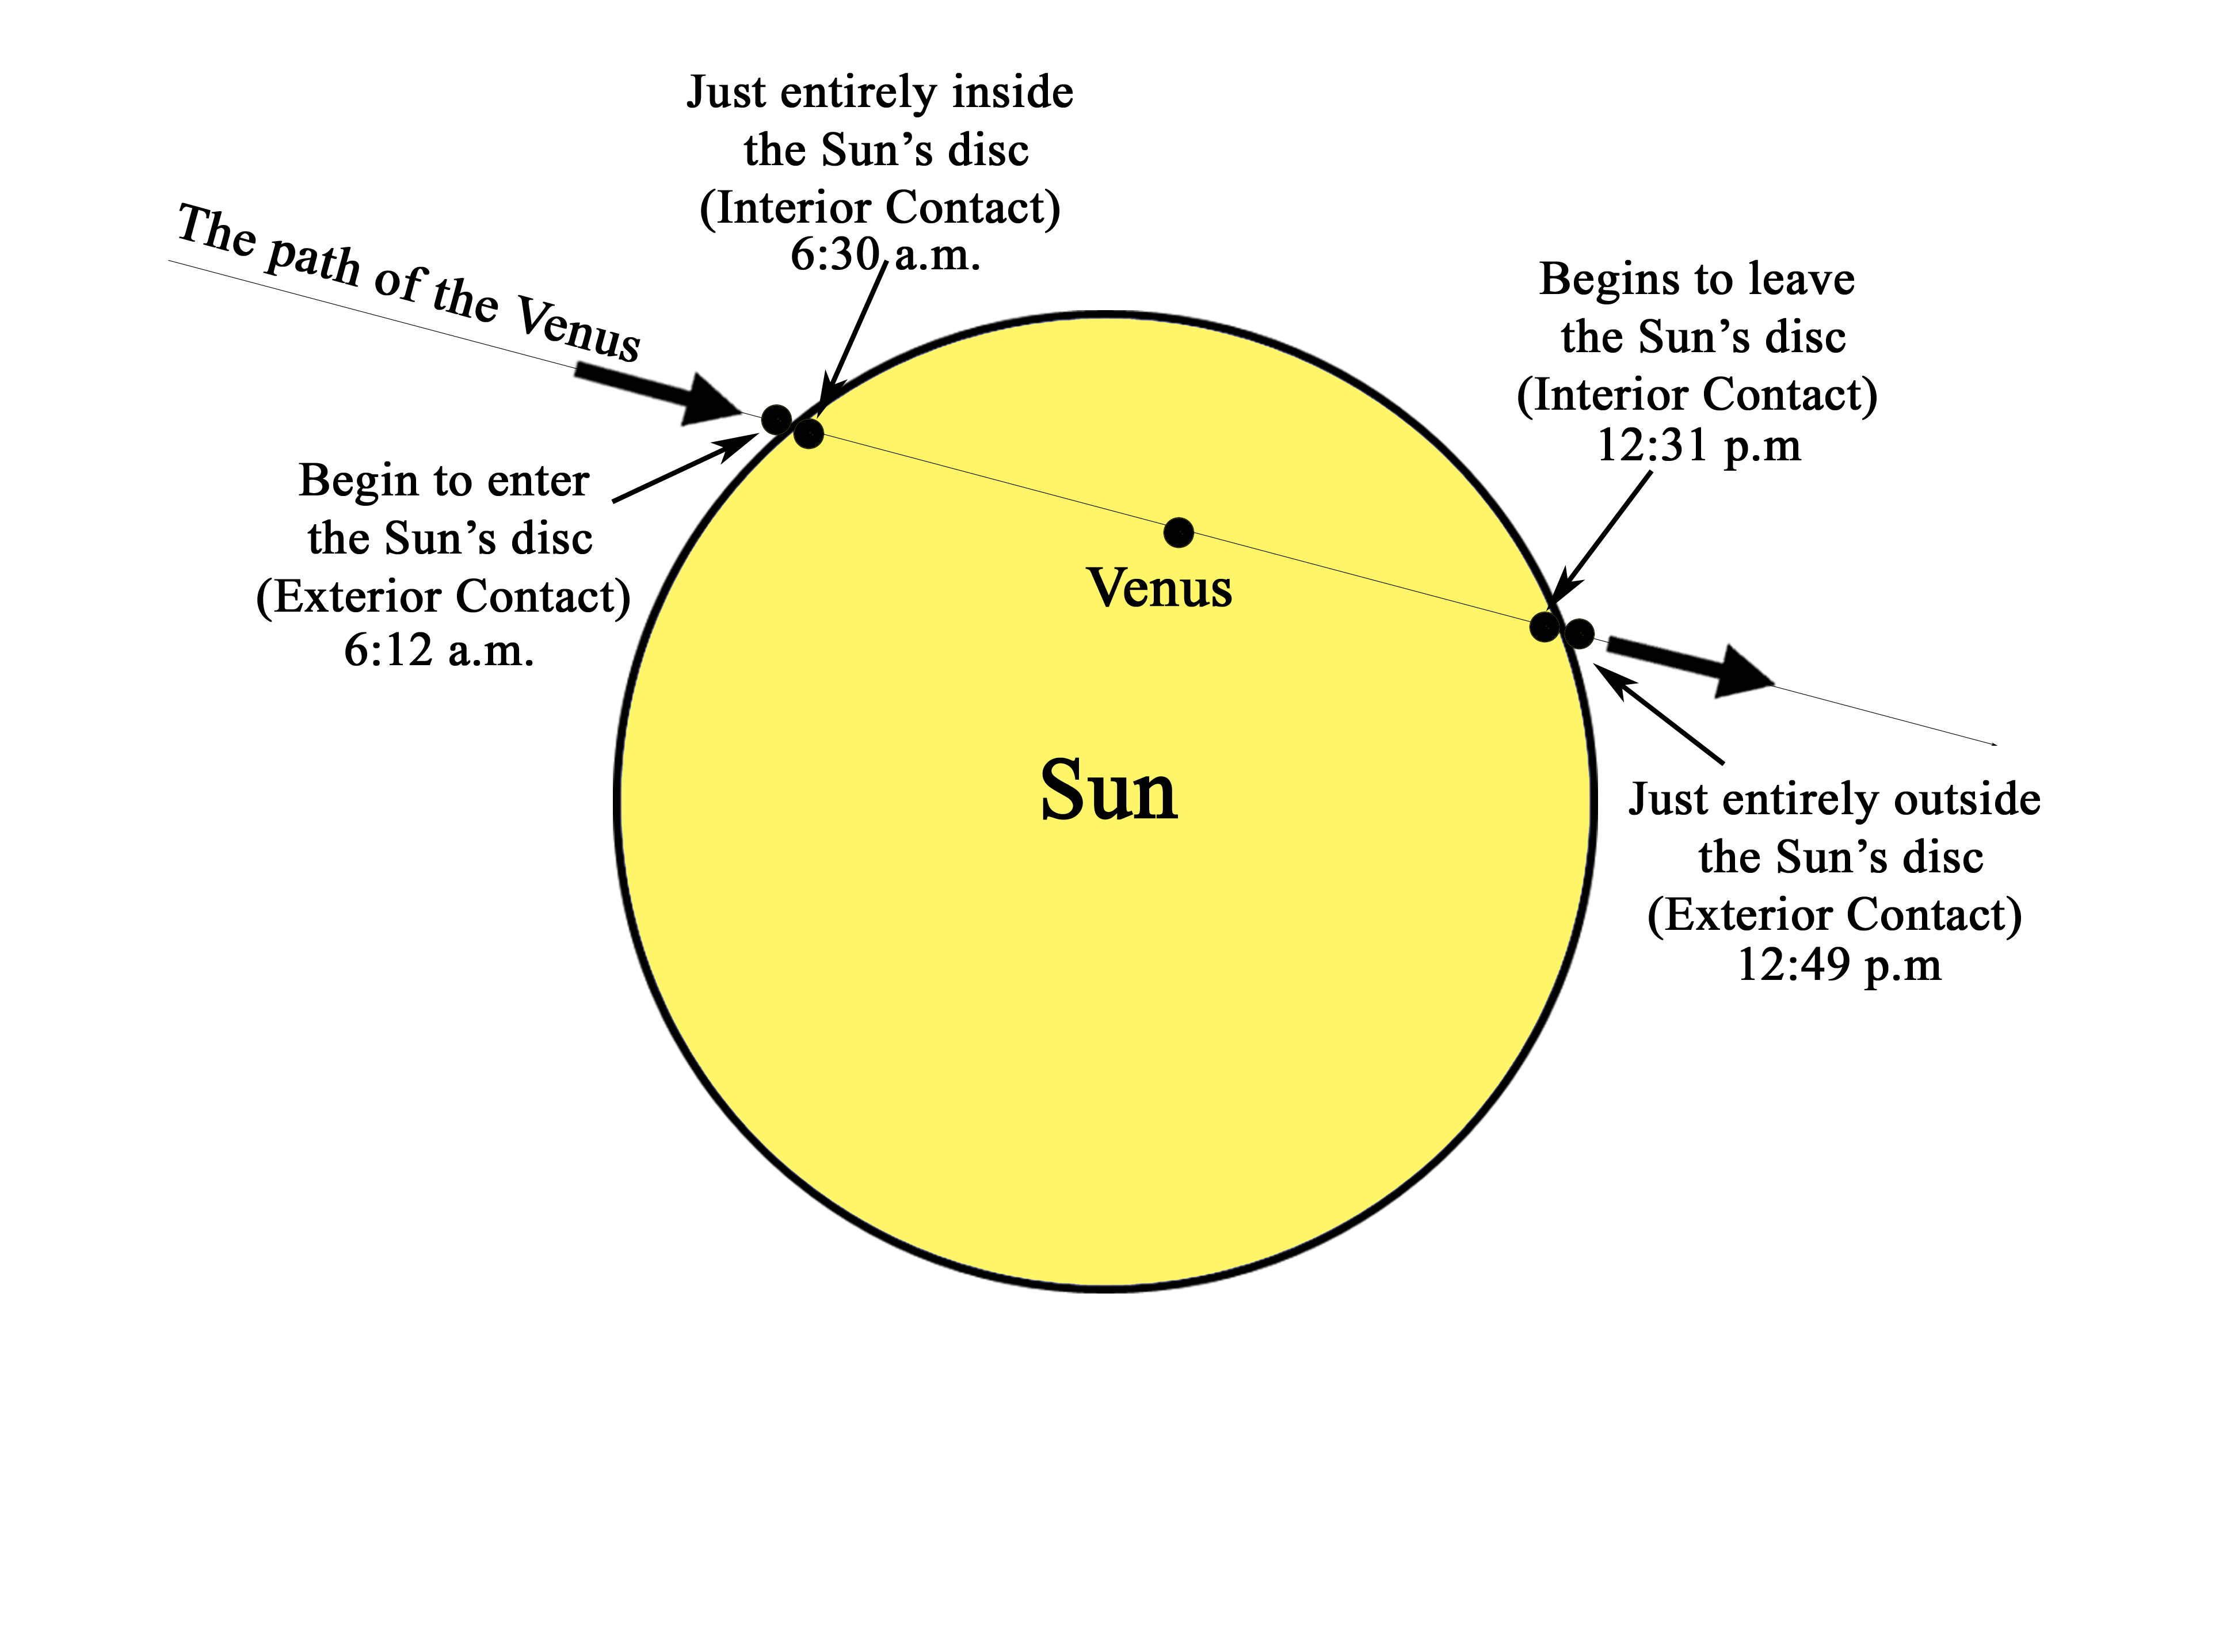 The different stages during the transit of Venus on 6 June 2012